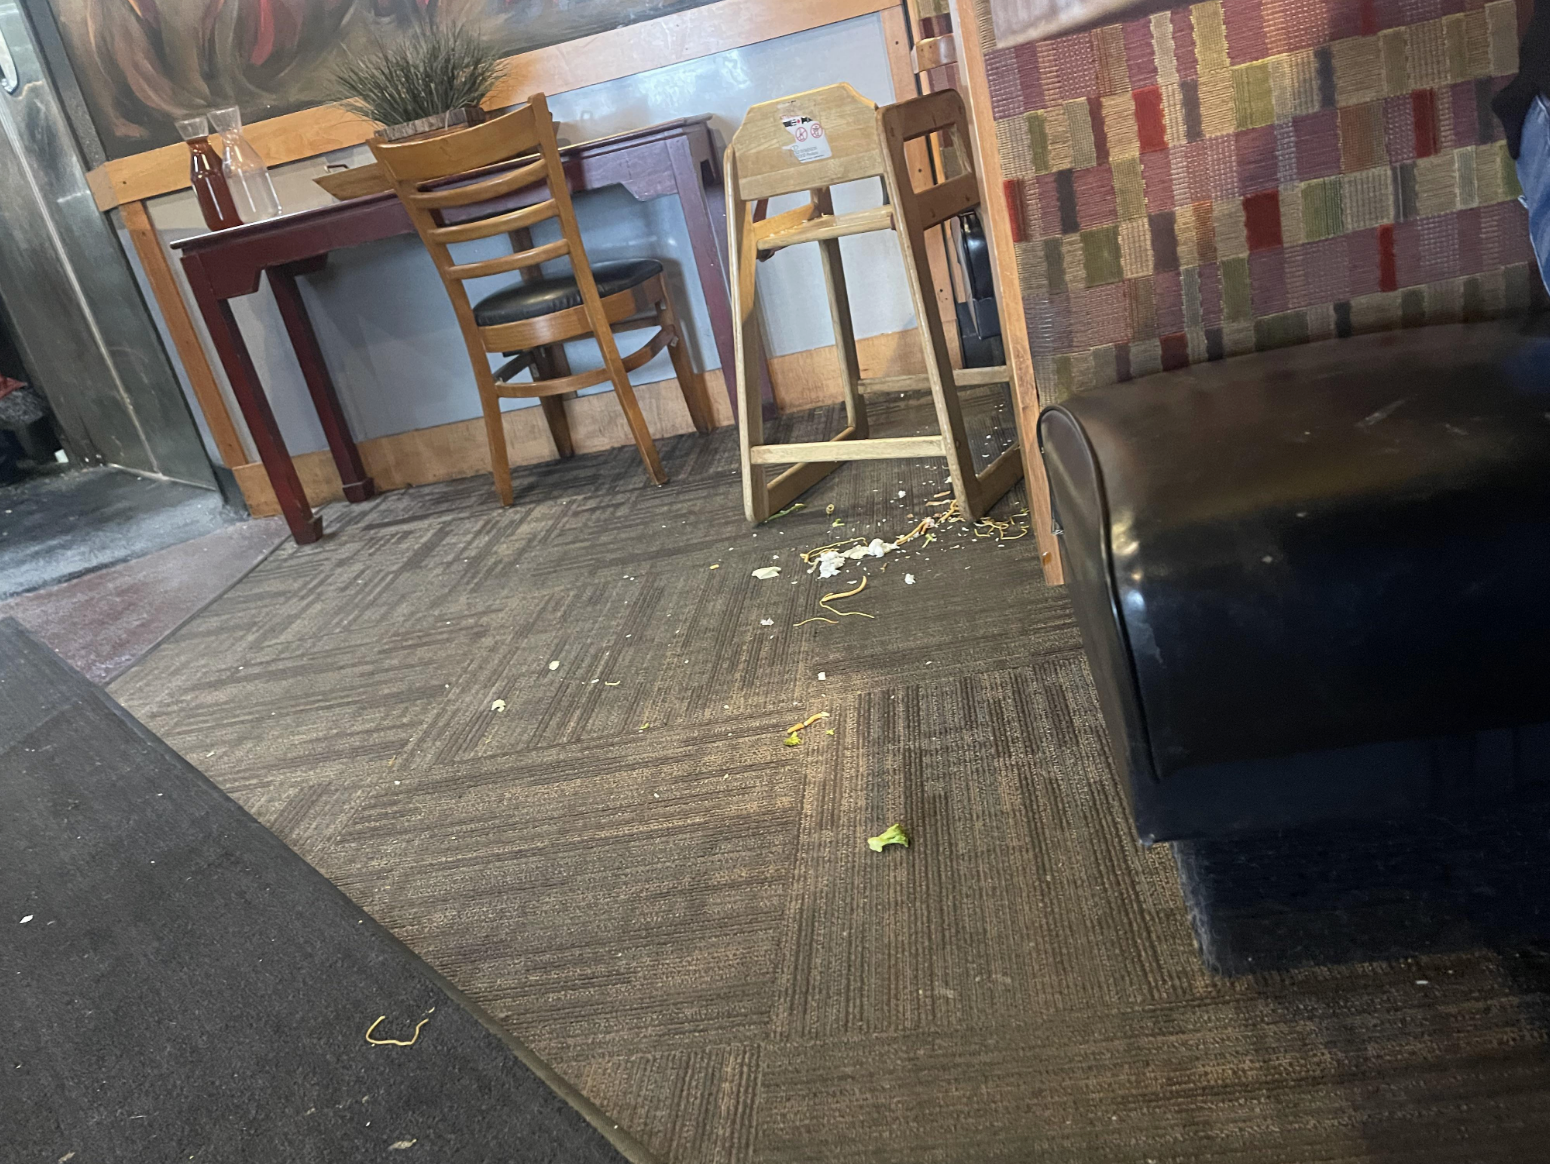 Food and waste all over the floor of a restaurant